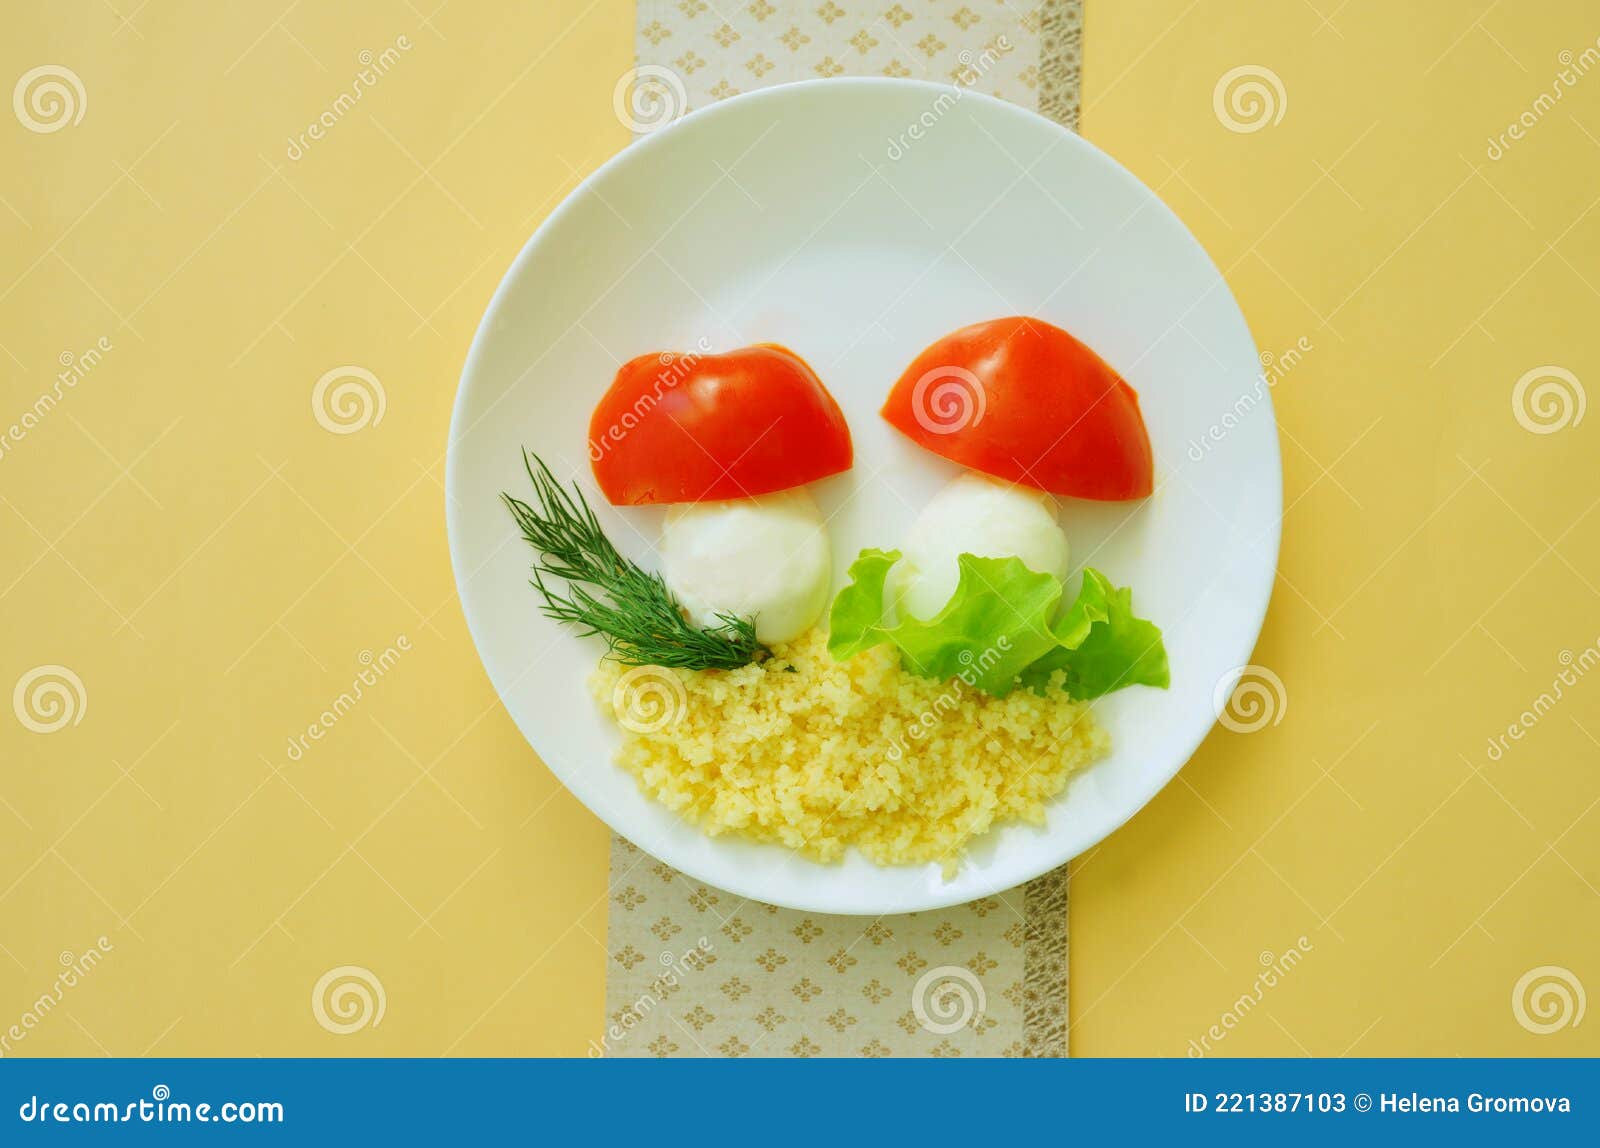 Mushrooms Made of Eggs and Porridge. Funny Dish for Kids. Creative Idea for  Breakfast. Lunch Time Stock Image - Image of mushrooms, fruit: 221387103